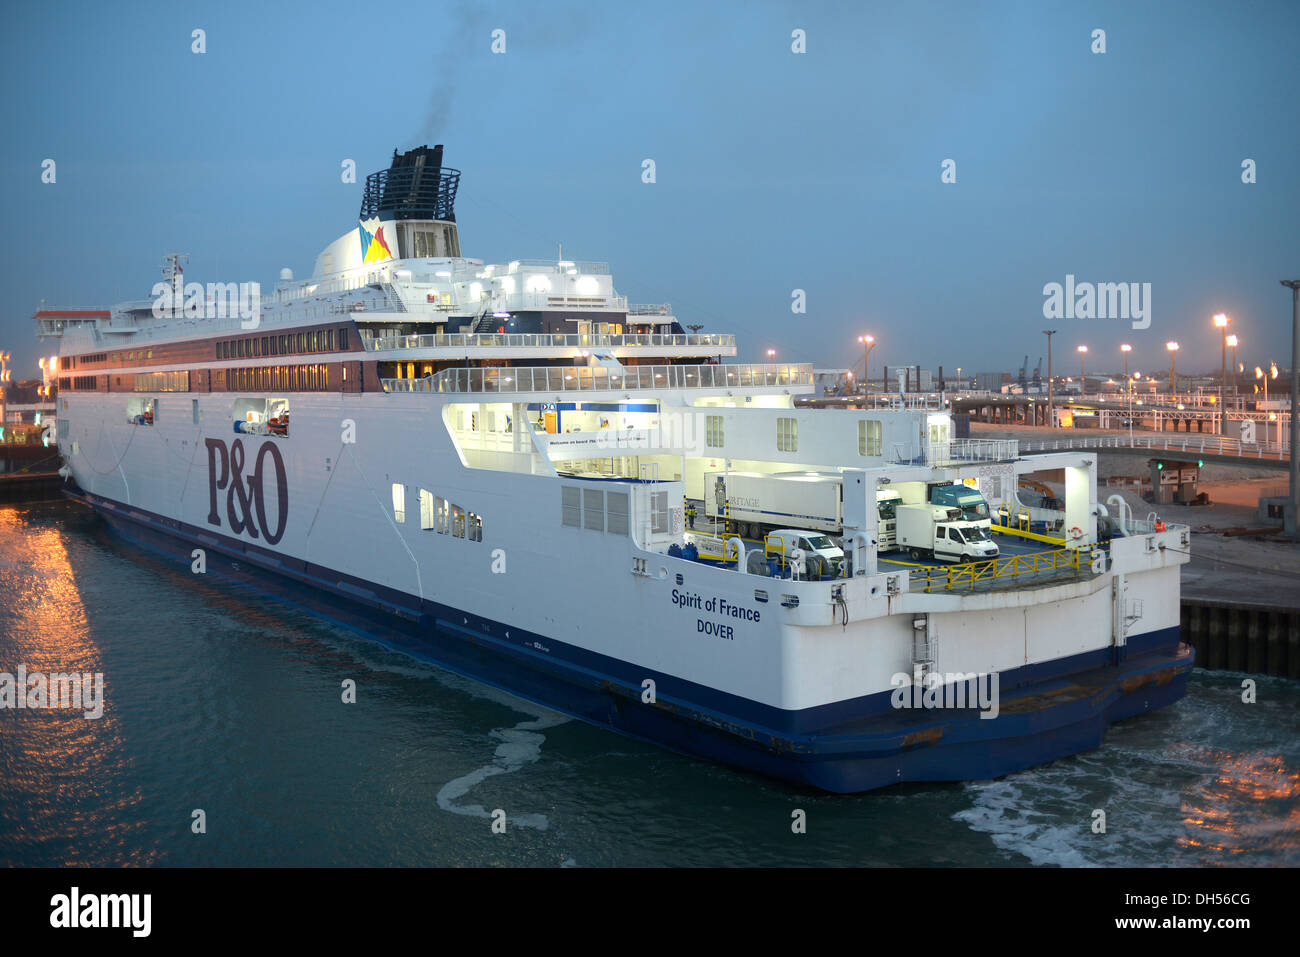 P&O Spirit of France loading at Calais before sailing for Dover, the ...